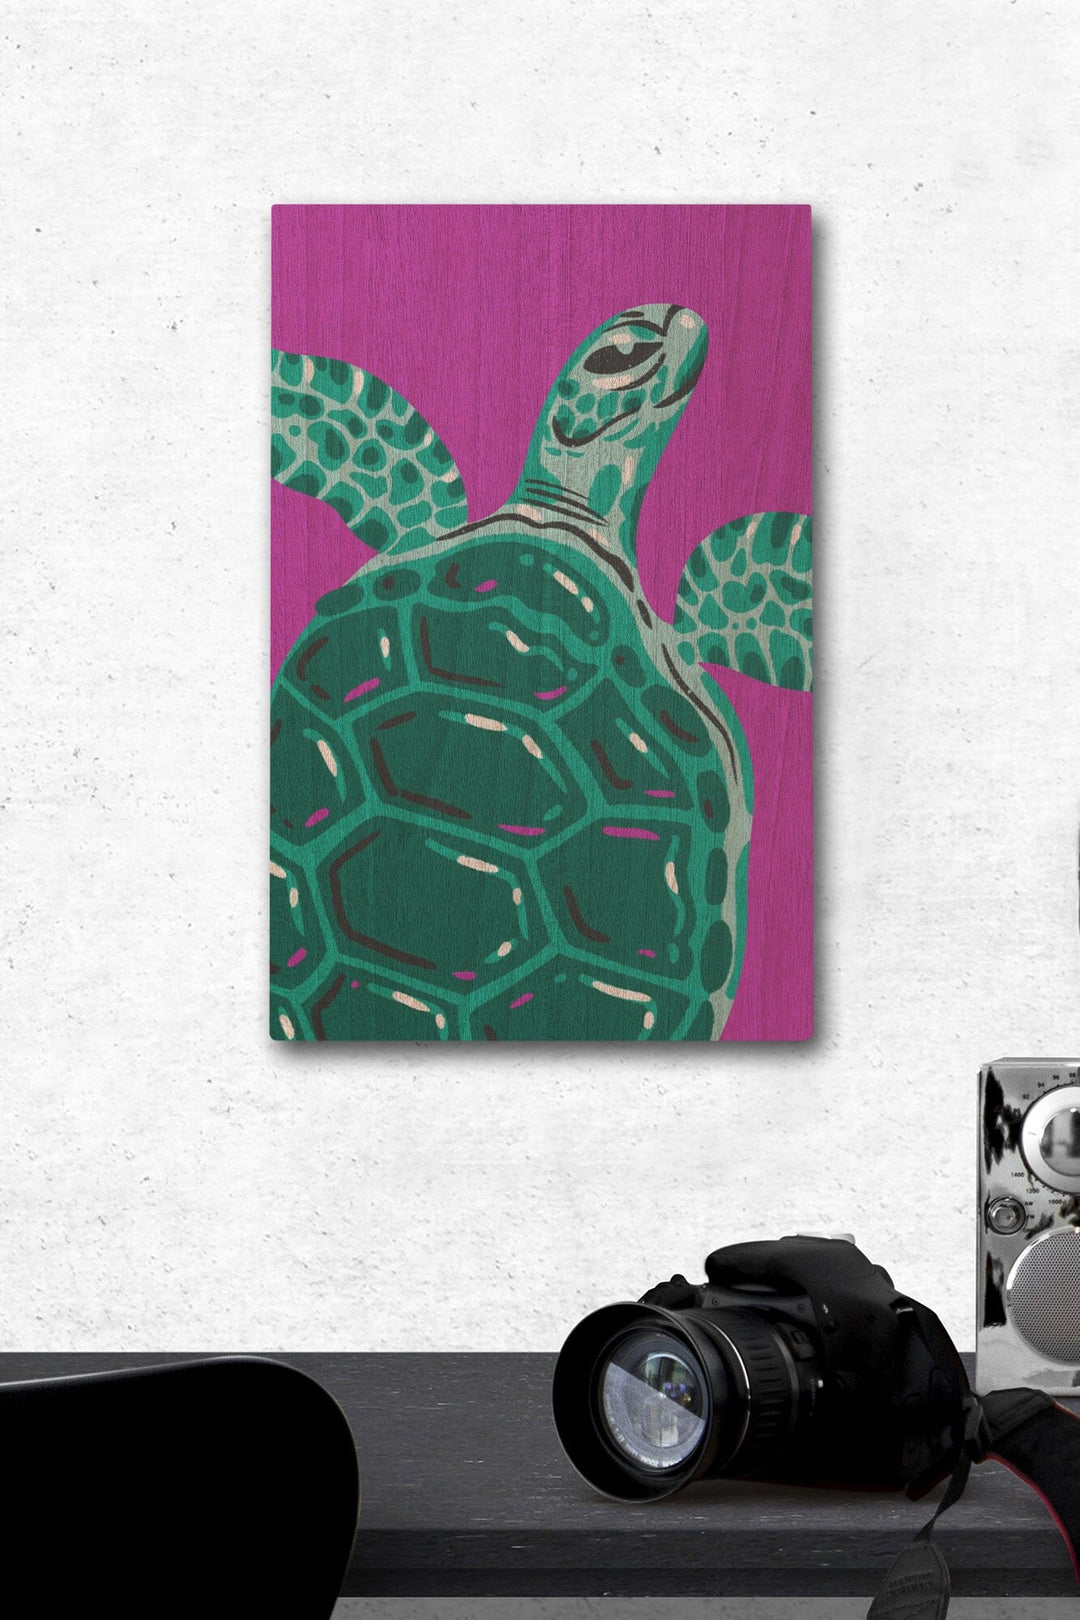 Lush Environment Collection, Sea Turtle Portrait, Wood Signs and Postcards Wood Lantern Press 12 x 18 Wood Gallery Print 